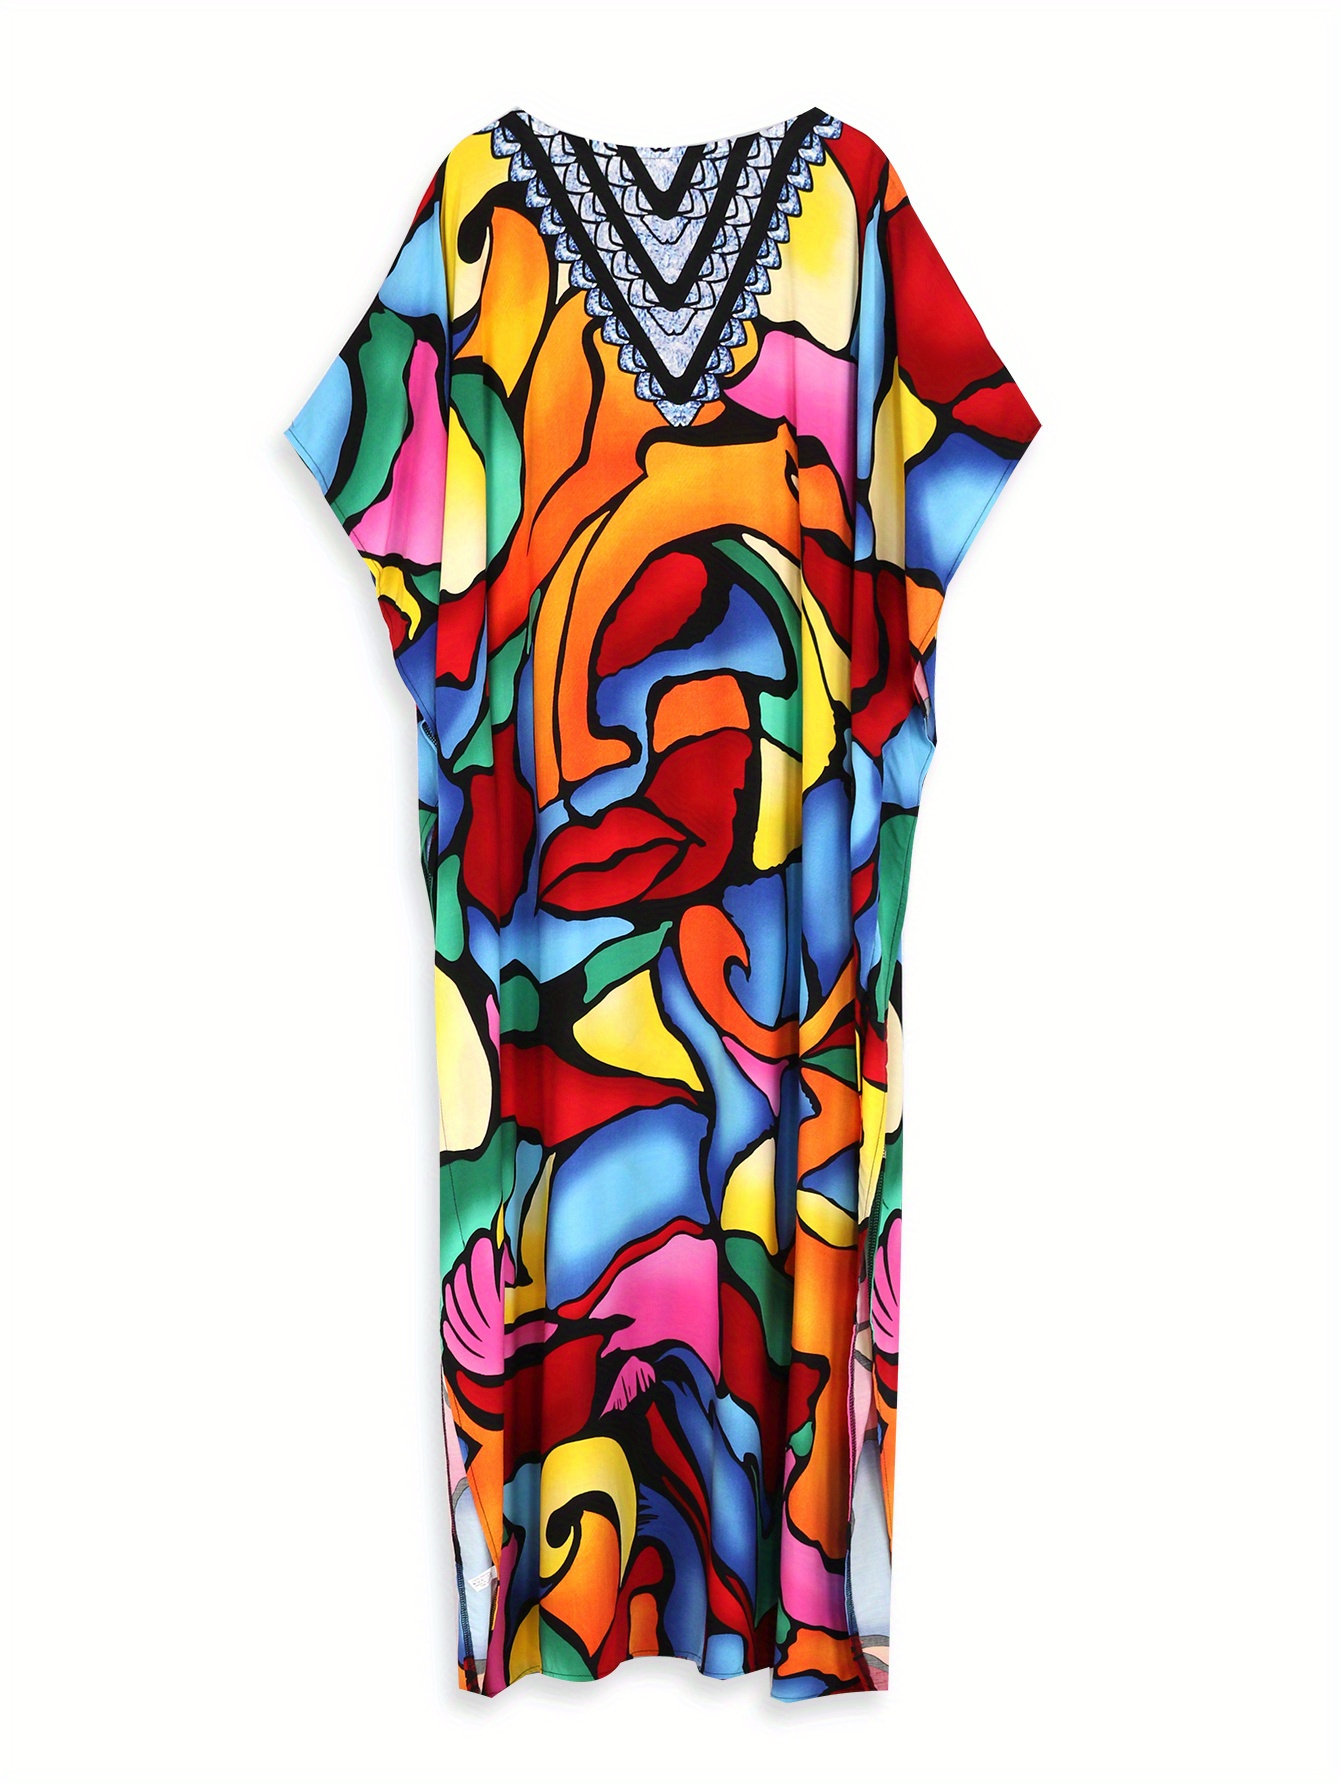 Women's Summer T Shirt Maxi Dress Batwing Sleeve,Items Under 1 Dollar,Lightning  Sales Today Deals,Prime Member Deals only,clearence Items,Warehouse Sale  and Deals Clearance